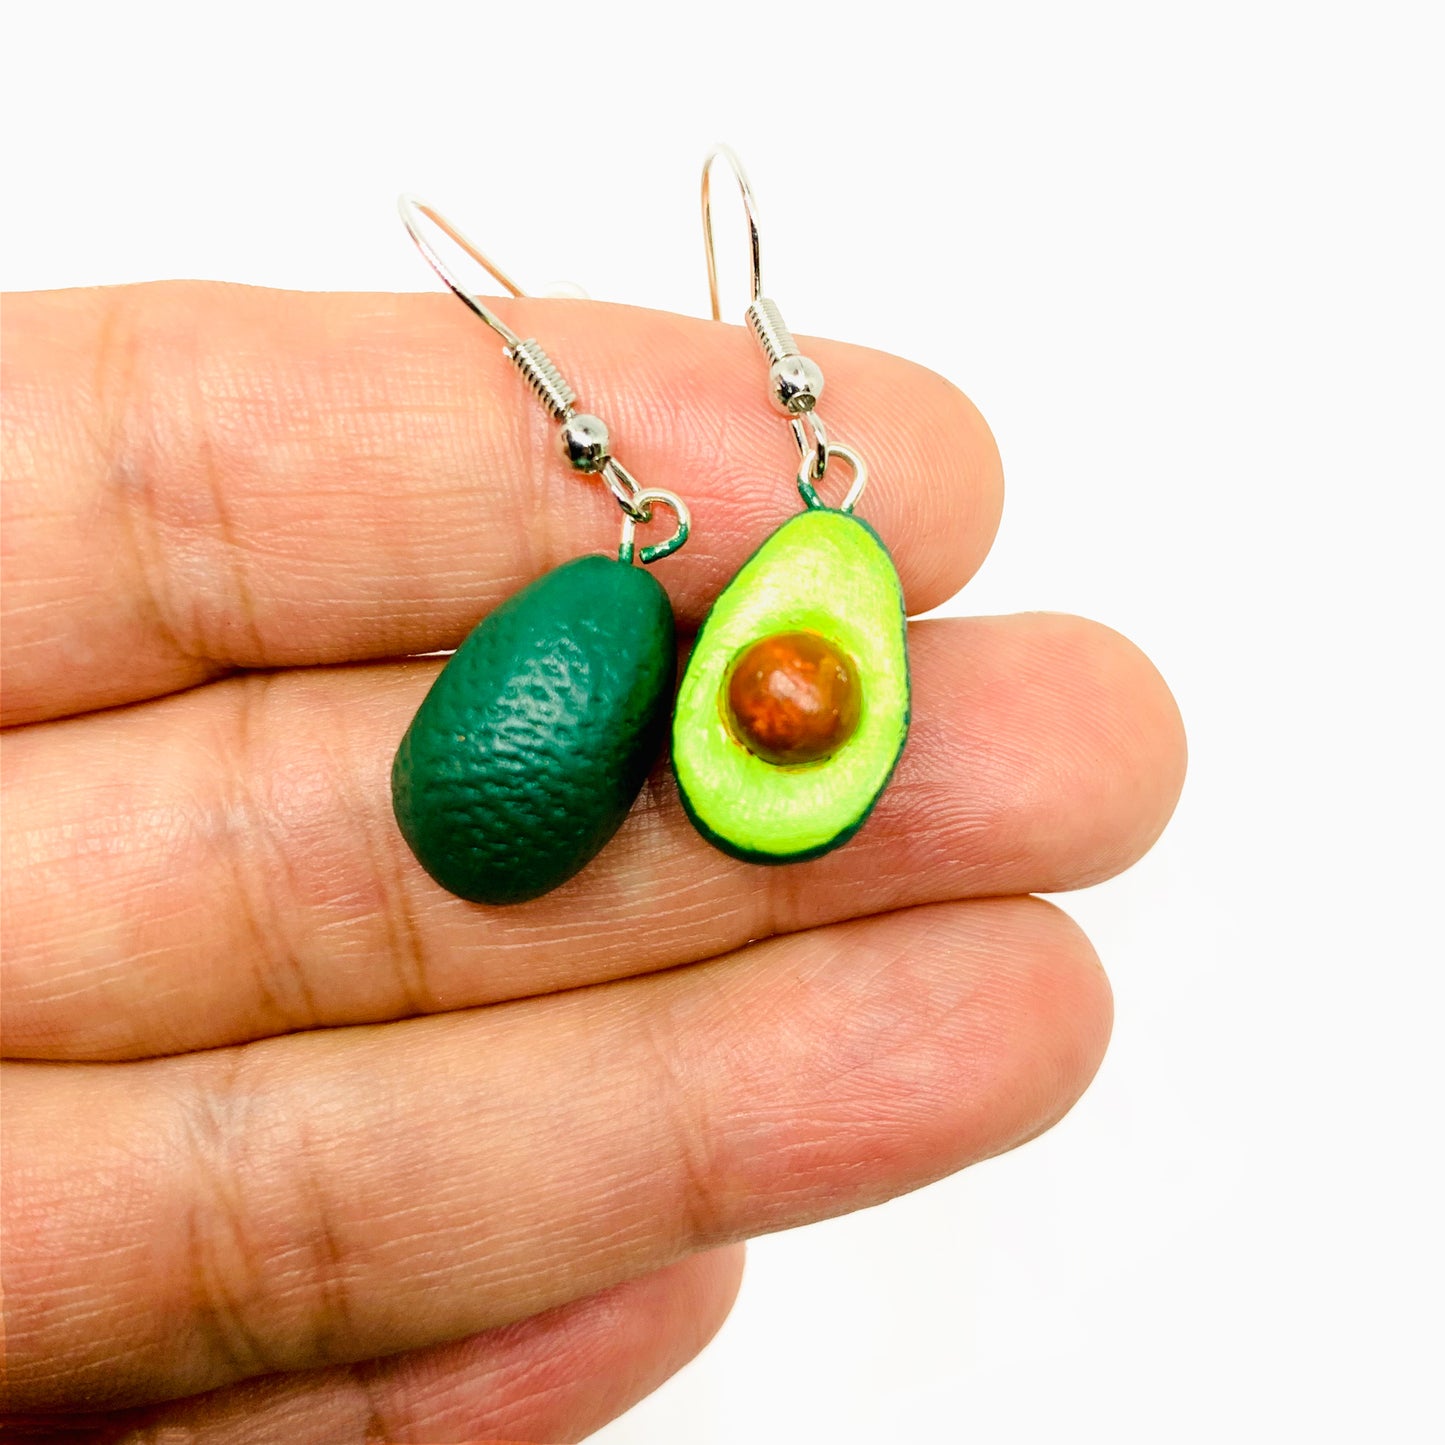 Avocado Earrings: Handmade and hand painted natural clay avocado drop and dangle earrings for girls. Mexican jewelry. Mexico folk art. Food jewelry inspired by Frida Kahlo by Fridamaniacs and Fridalovers. Women and girls gift birthday idea. Aretes de agucate hechos de barro y pintados a mano